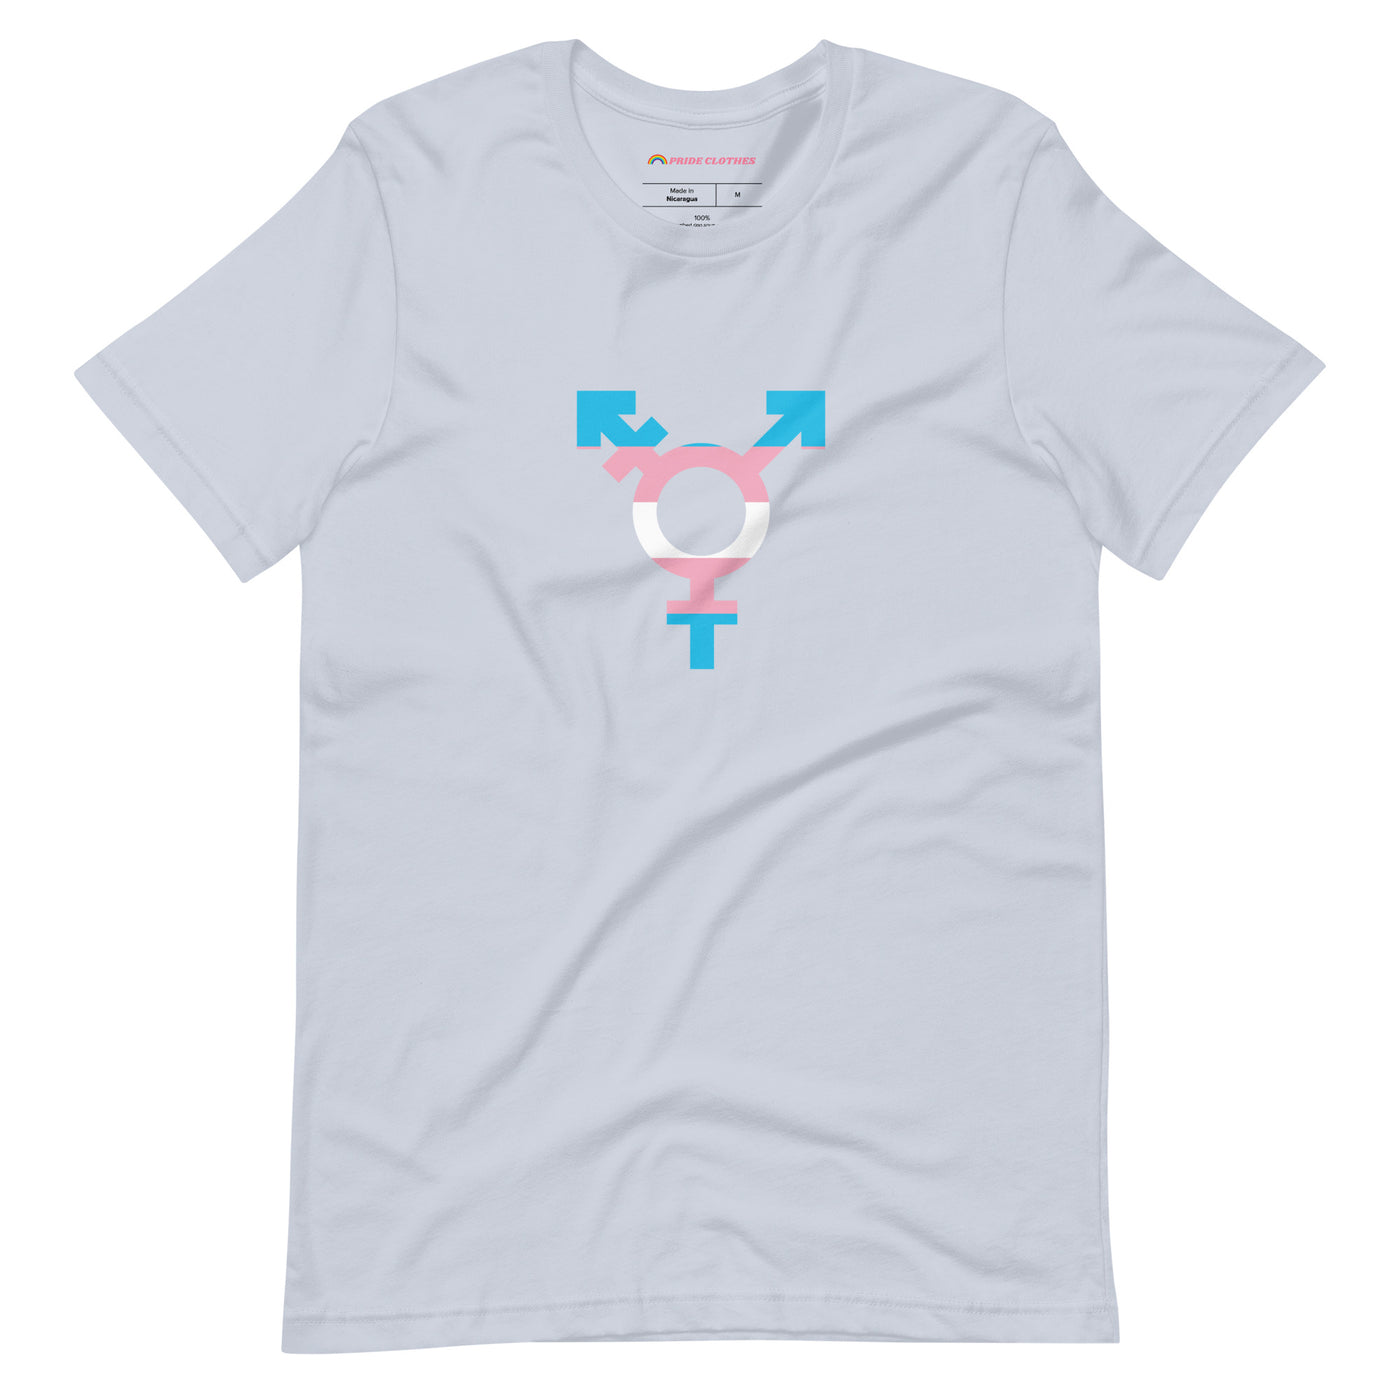 Pride Clothes - Authentic and Beautiful Trans Pride Flag Symbol T-Shirt - Light Blue